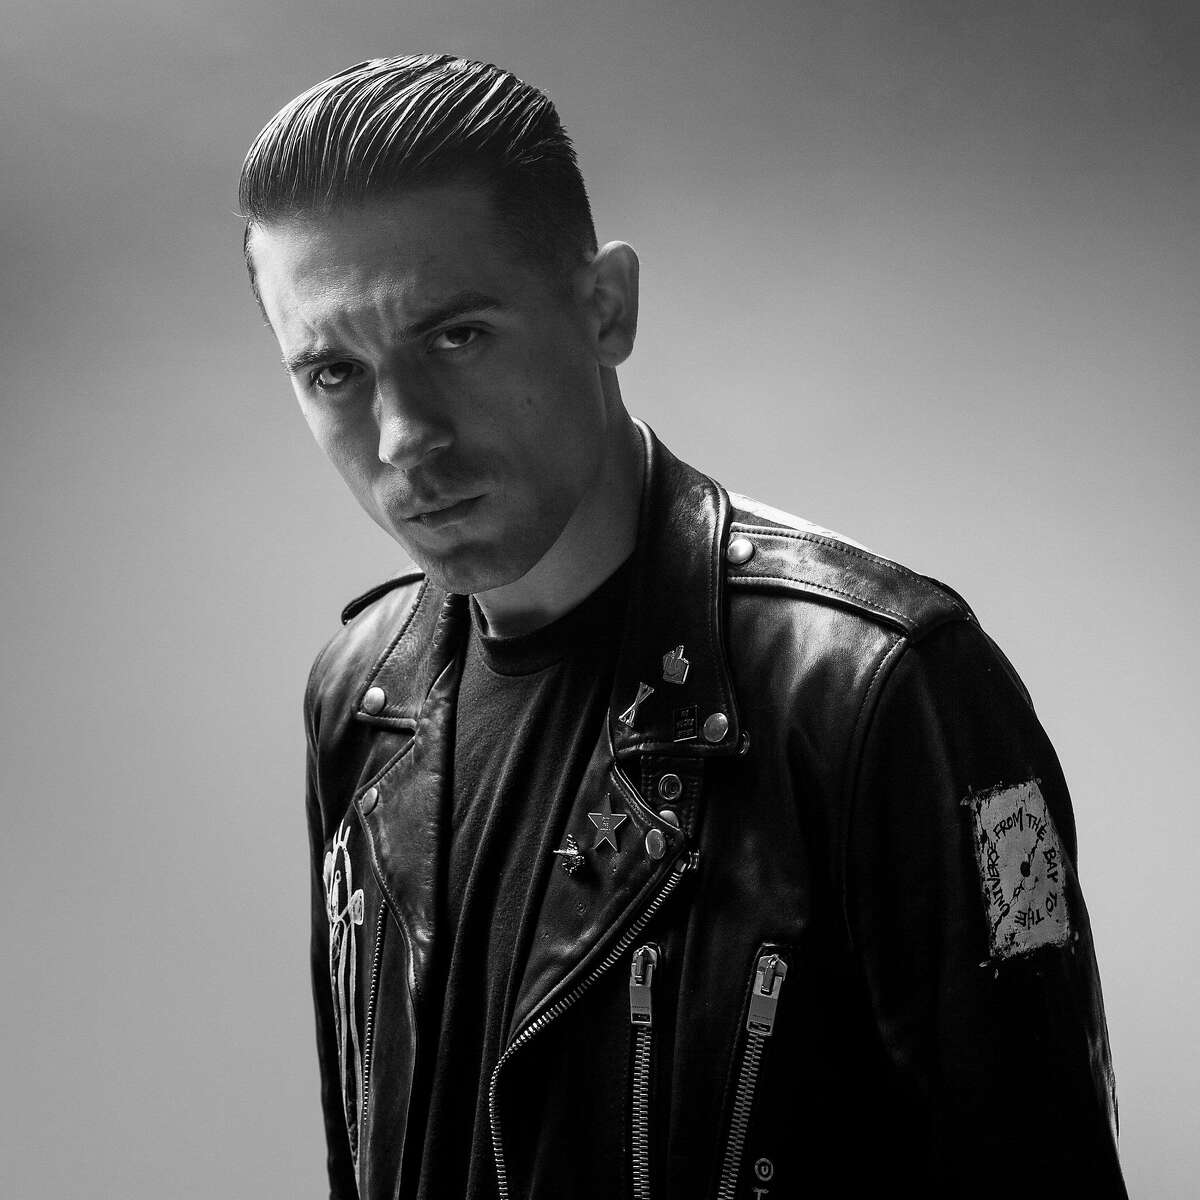 G-Eazy performs at Hartford�s Xfinity Theatre on Friday, Aug. 5.